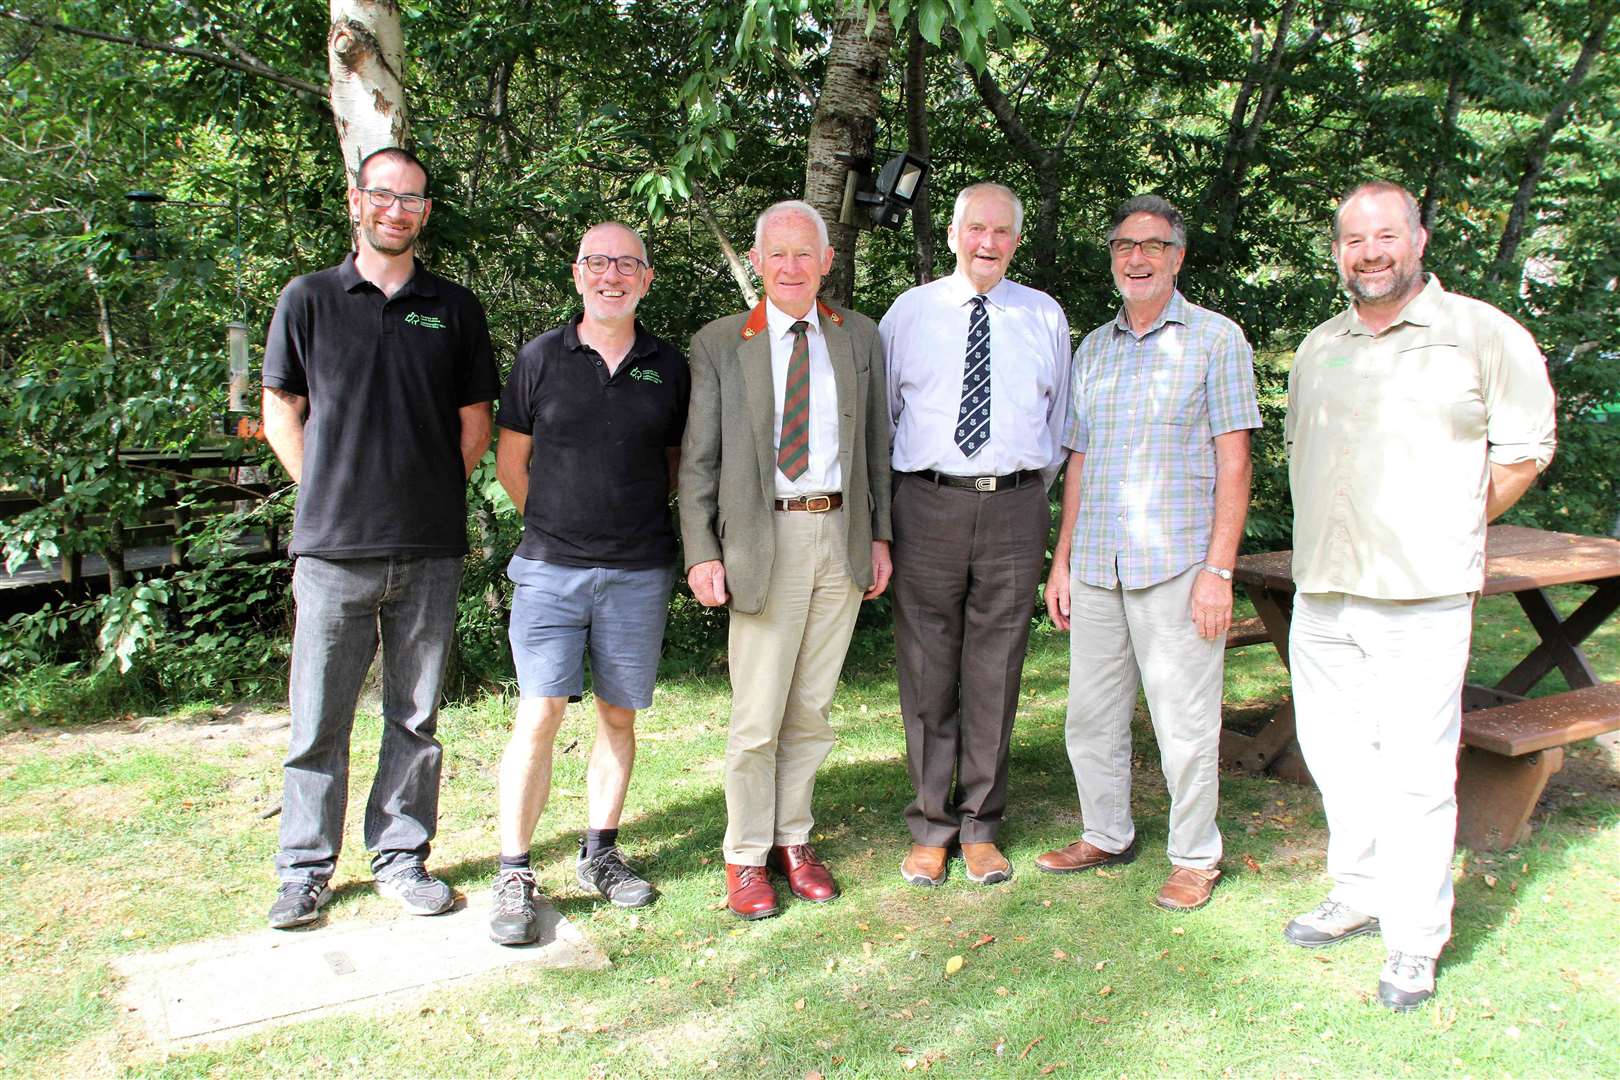 Generations of foresters at today's birthday party: from left, Tom Cameron (area wildlife manager) Brian Duff (Strathspey forester) Bryce Reynard (forester 1973-76) Alastair MacLeod (head forester '79 - 87) Tony Hinde (a senior forester whose link to Glenmore goes back to 1972) and Neil McInnes (2000-20008). Picture: Frances Porter